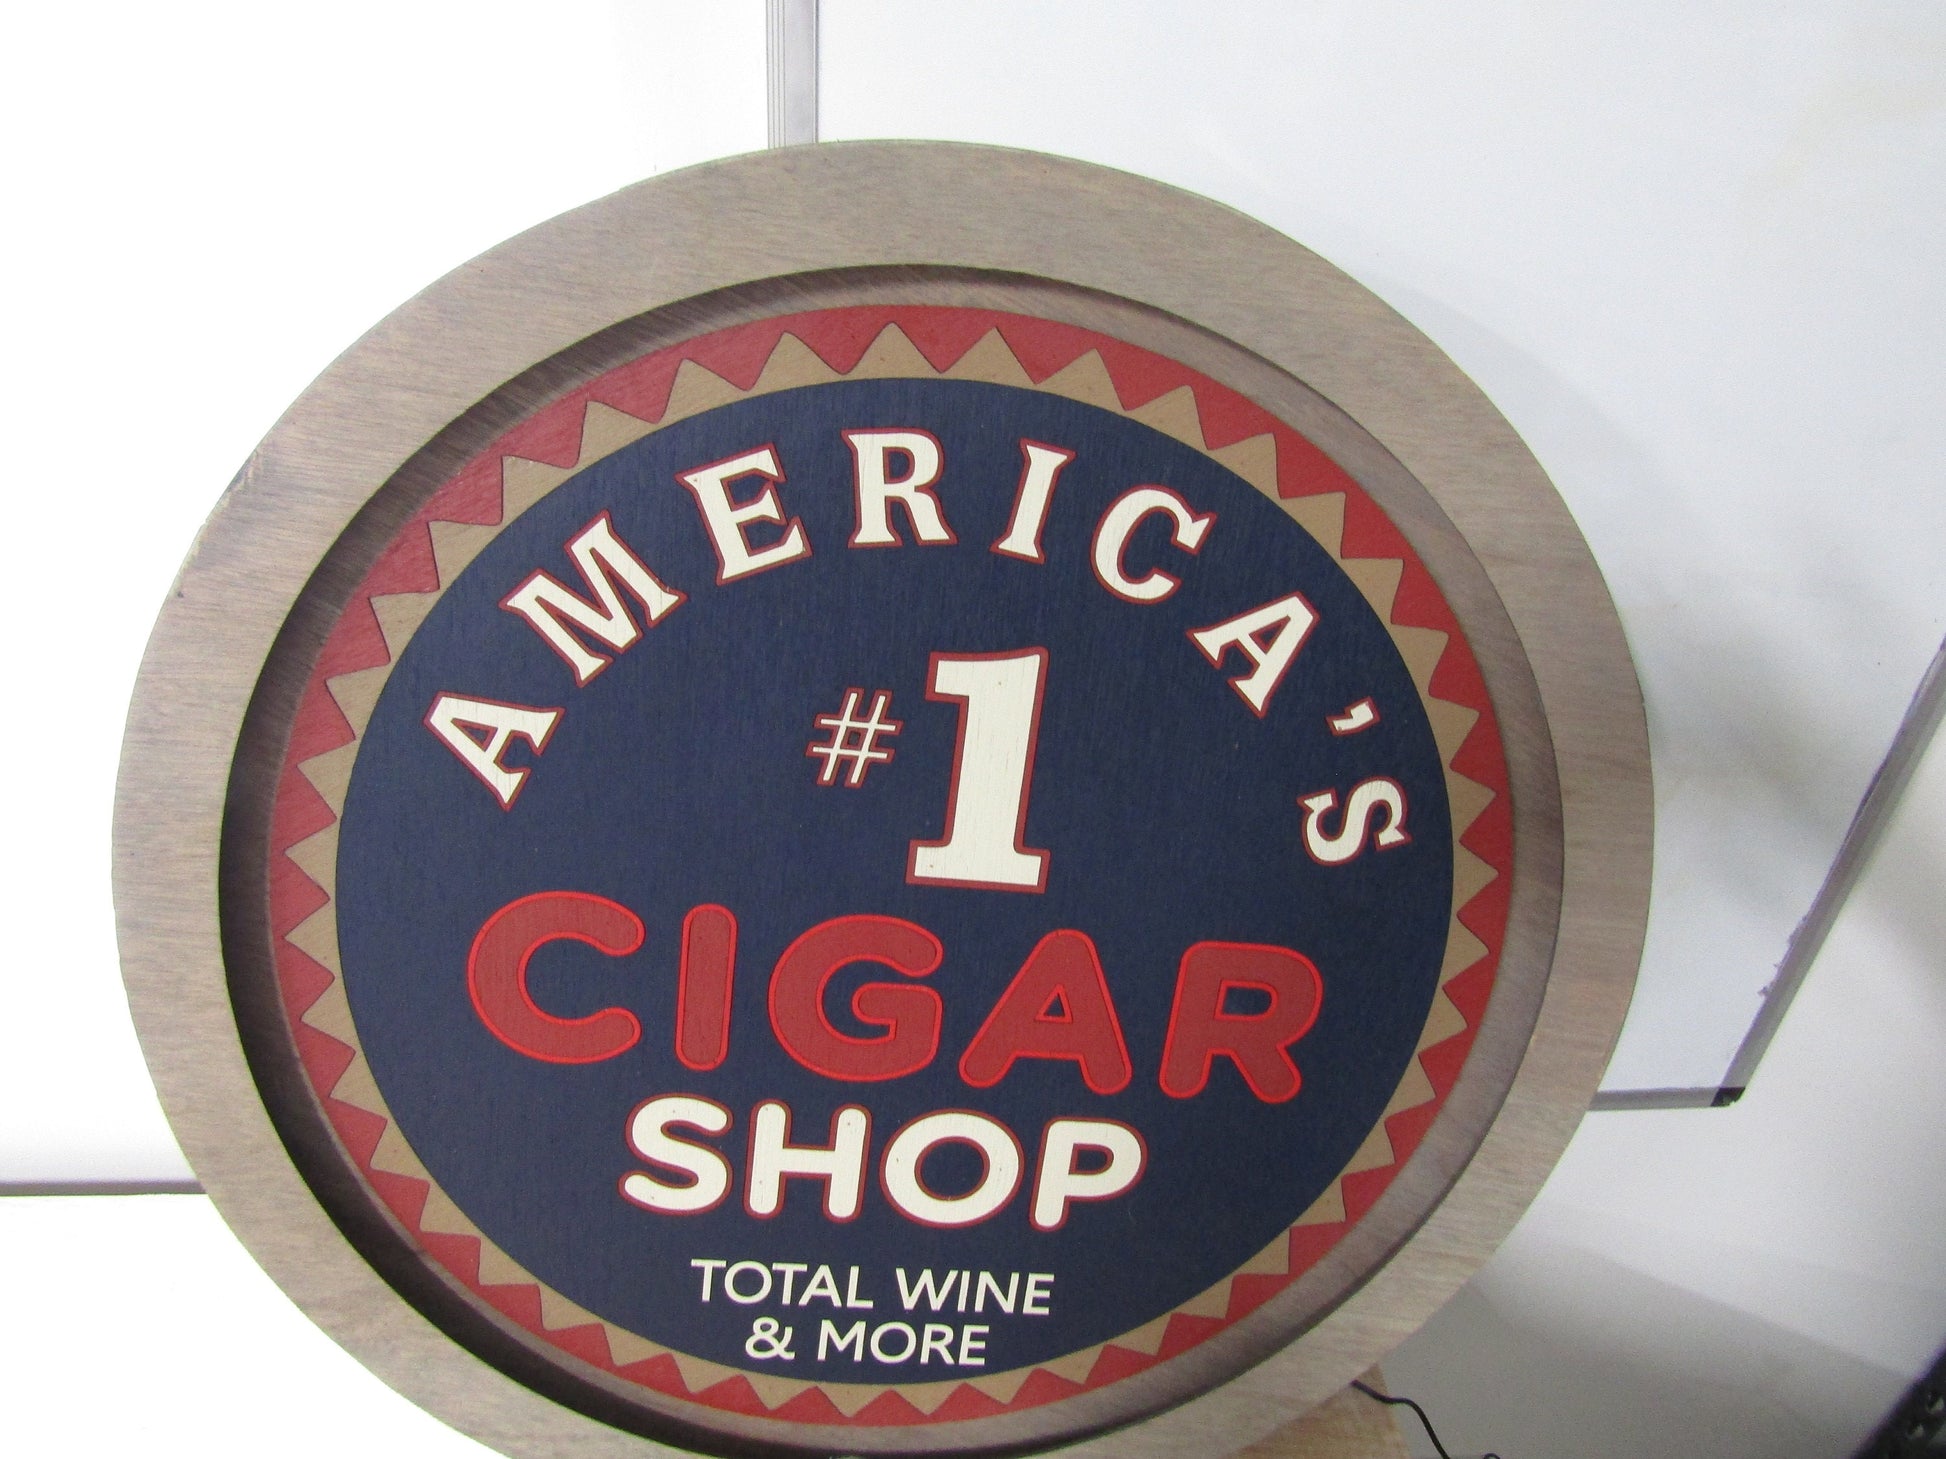 Custom Wood Cigar Shop #1 America Red White And Blue Wine LED Light Sign Commerical Signage Bar Store Convenient Shop Basement Handmade